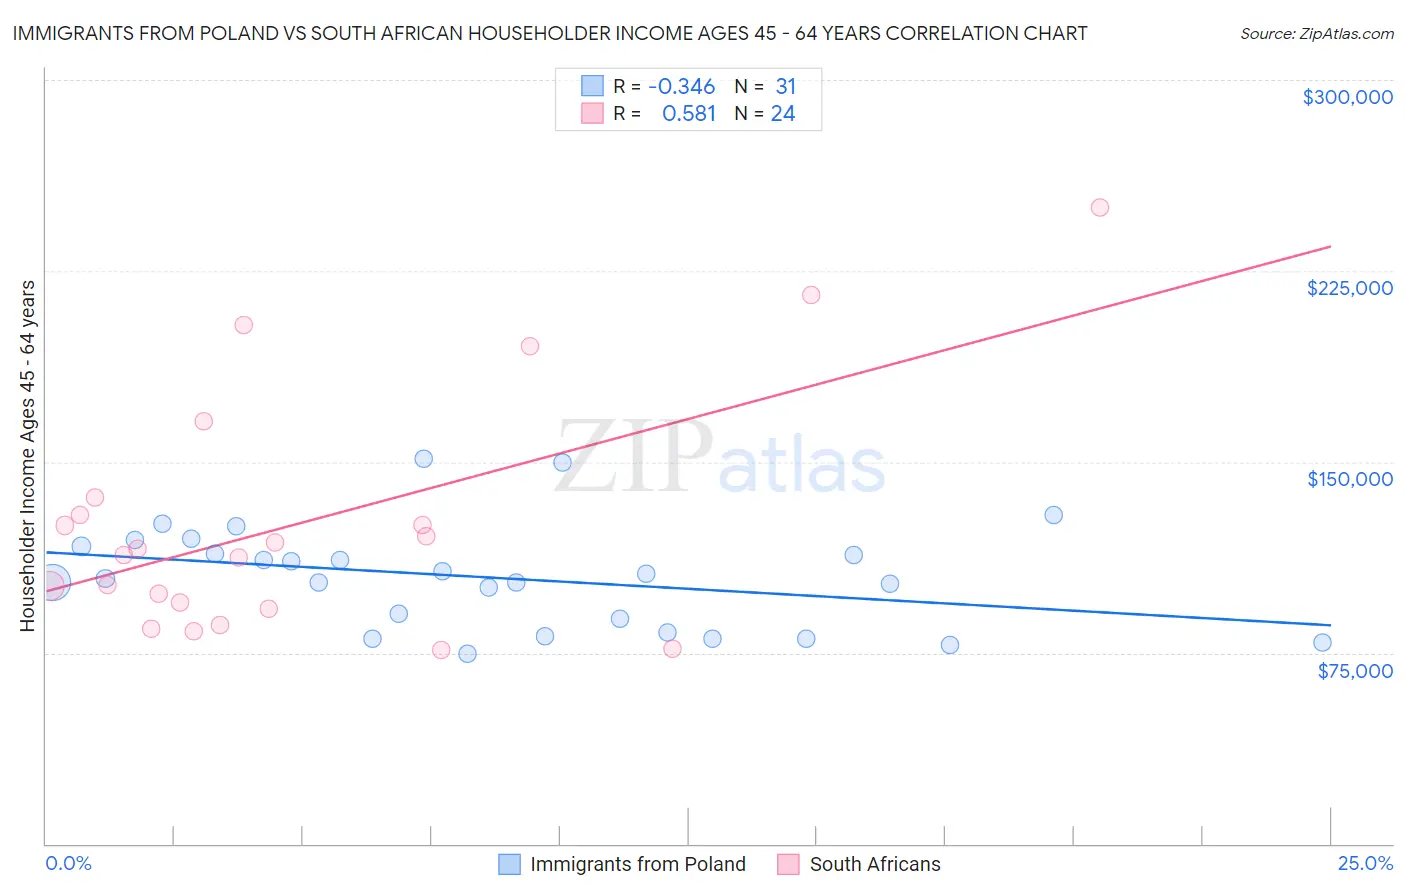 Immigrants from Poland vs South African Householder Income Ages 45 - 64 years